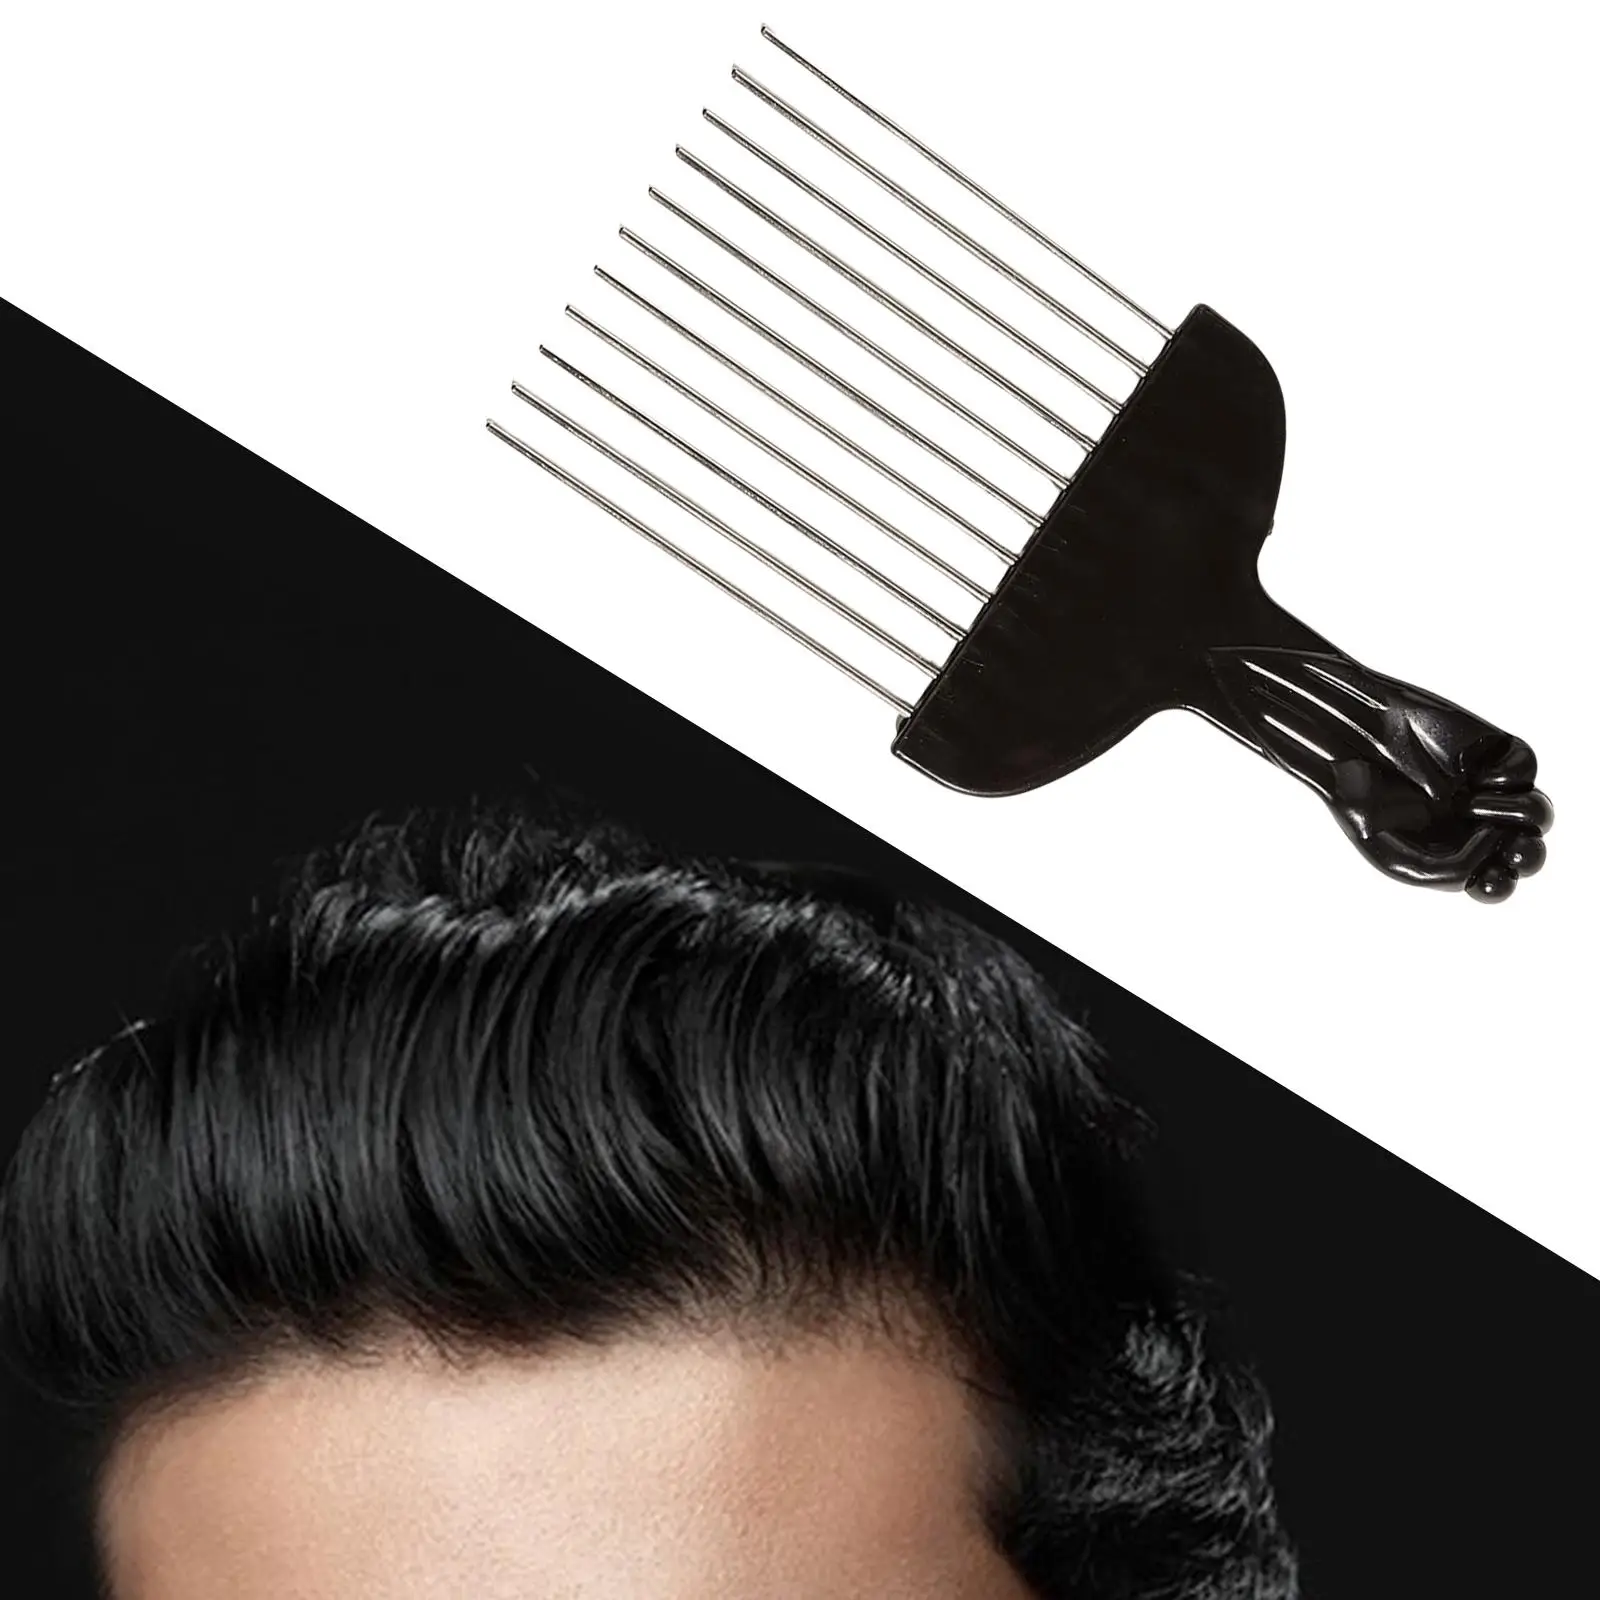 Prong Combs Curly Hair Styling Afro Hair Practical Afro Combs Hair Comb for Home